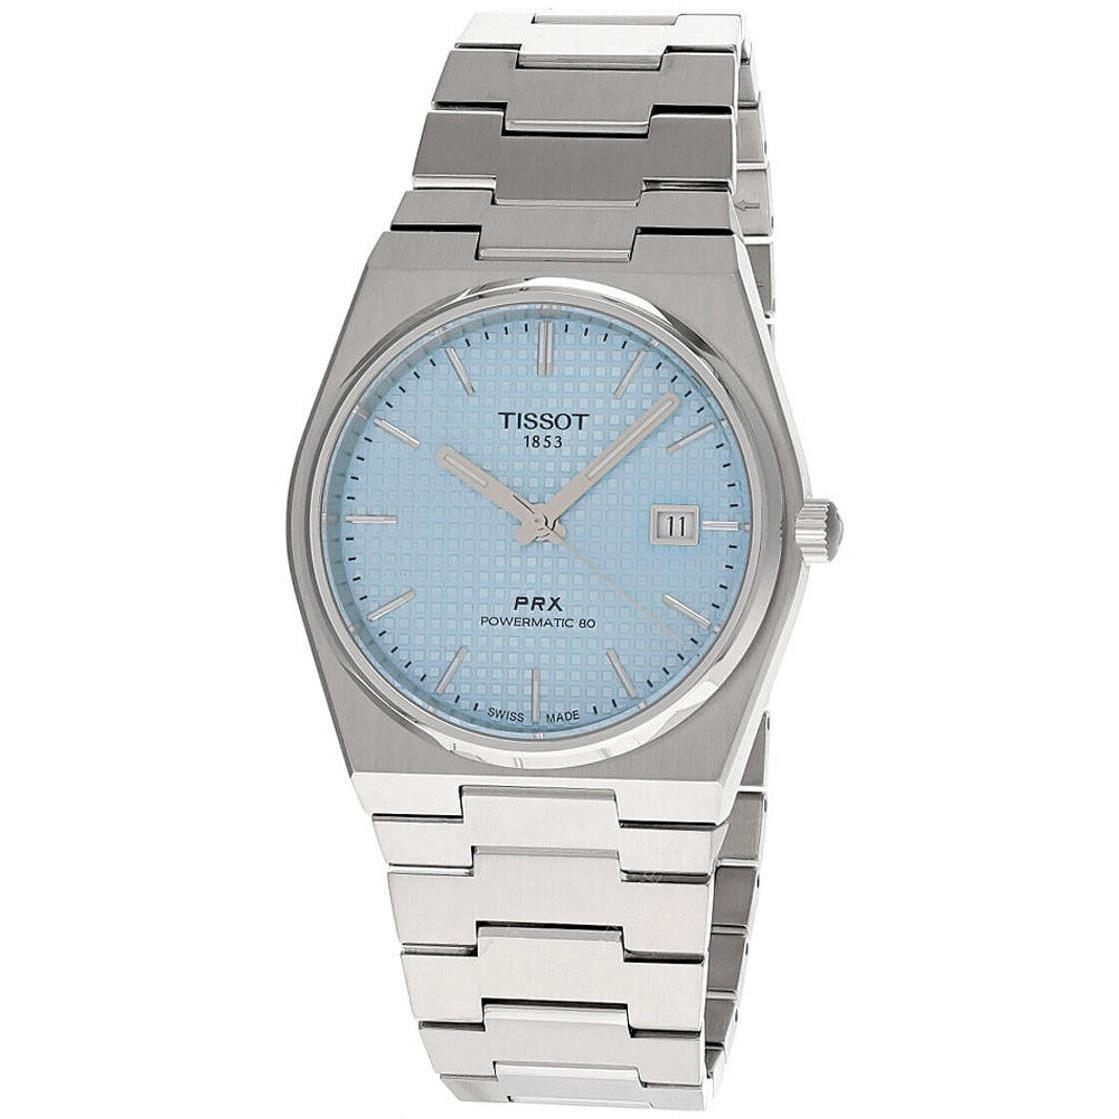 Tissot Prx Powermatic 80 40MM Ice Blue Dial Men`s Watch T137.407.11.351.00 - Ice Blue Dial, Silver Band, Silver Bezel